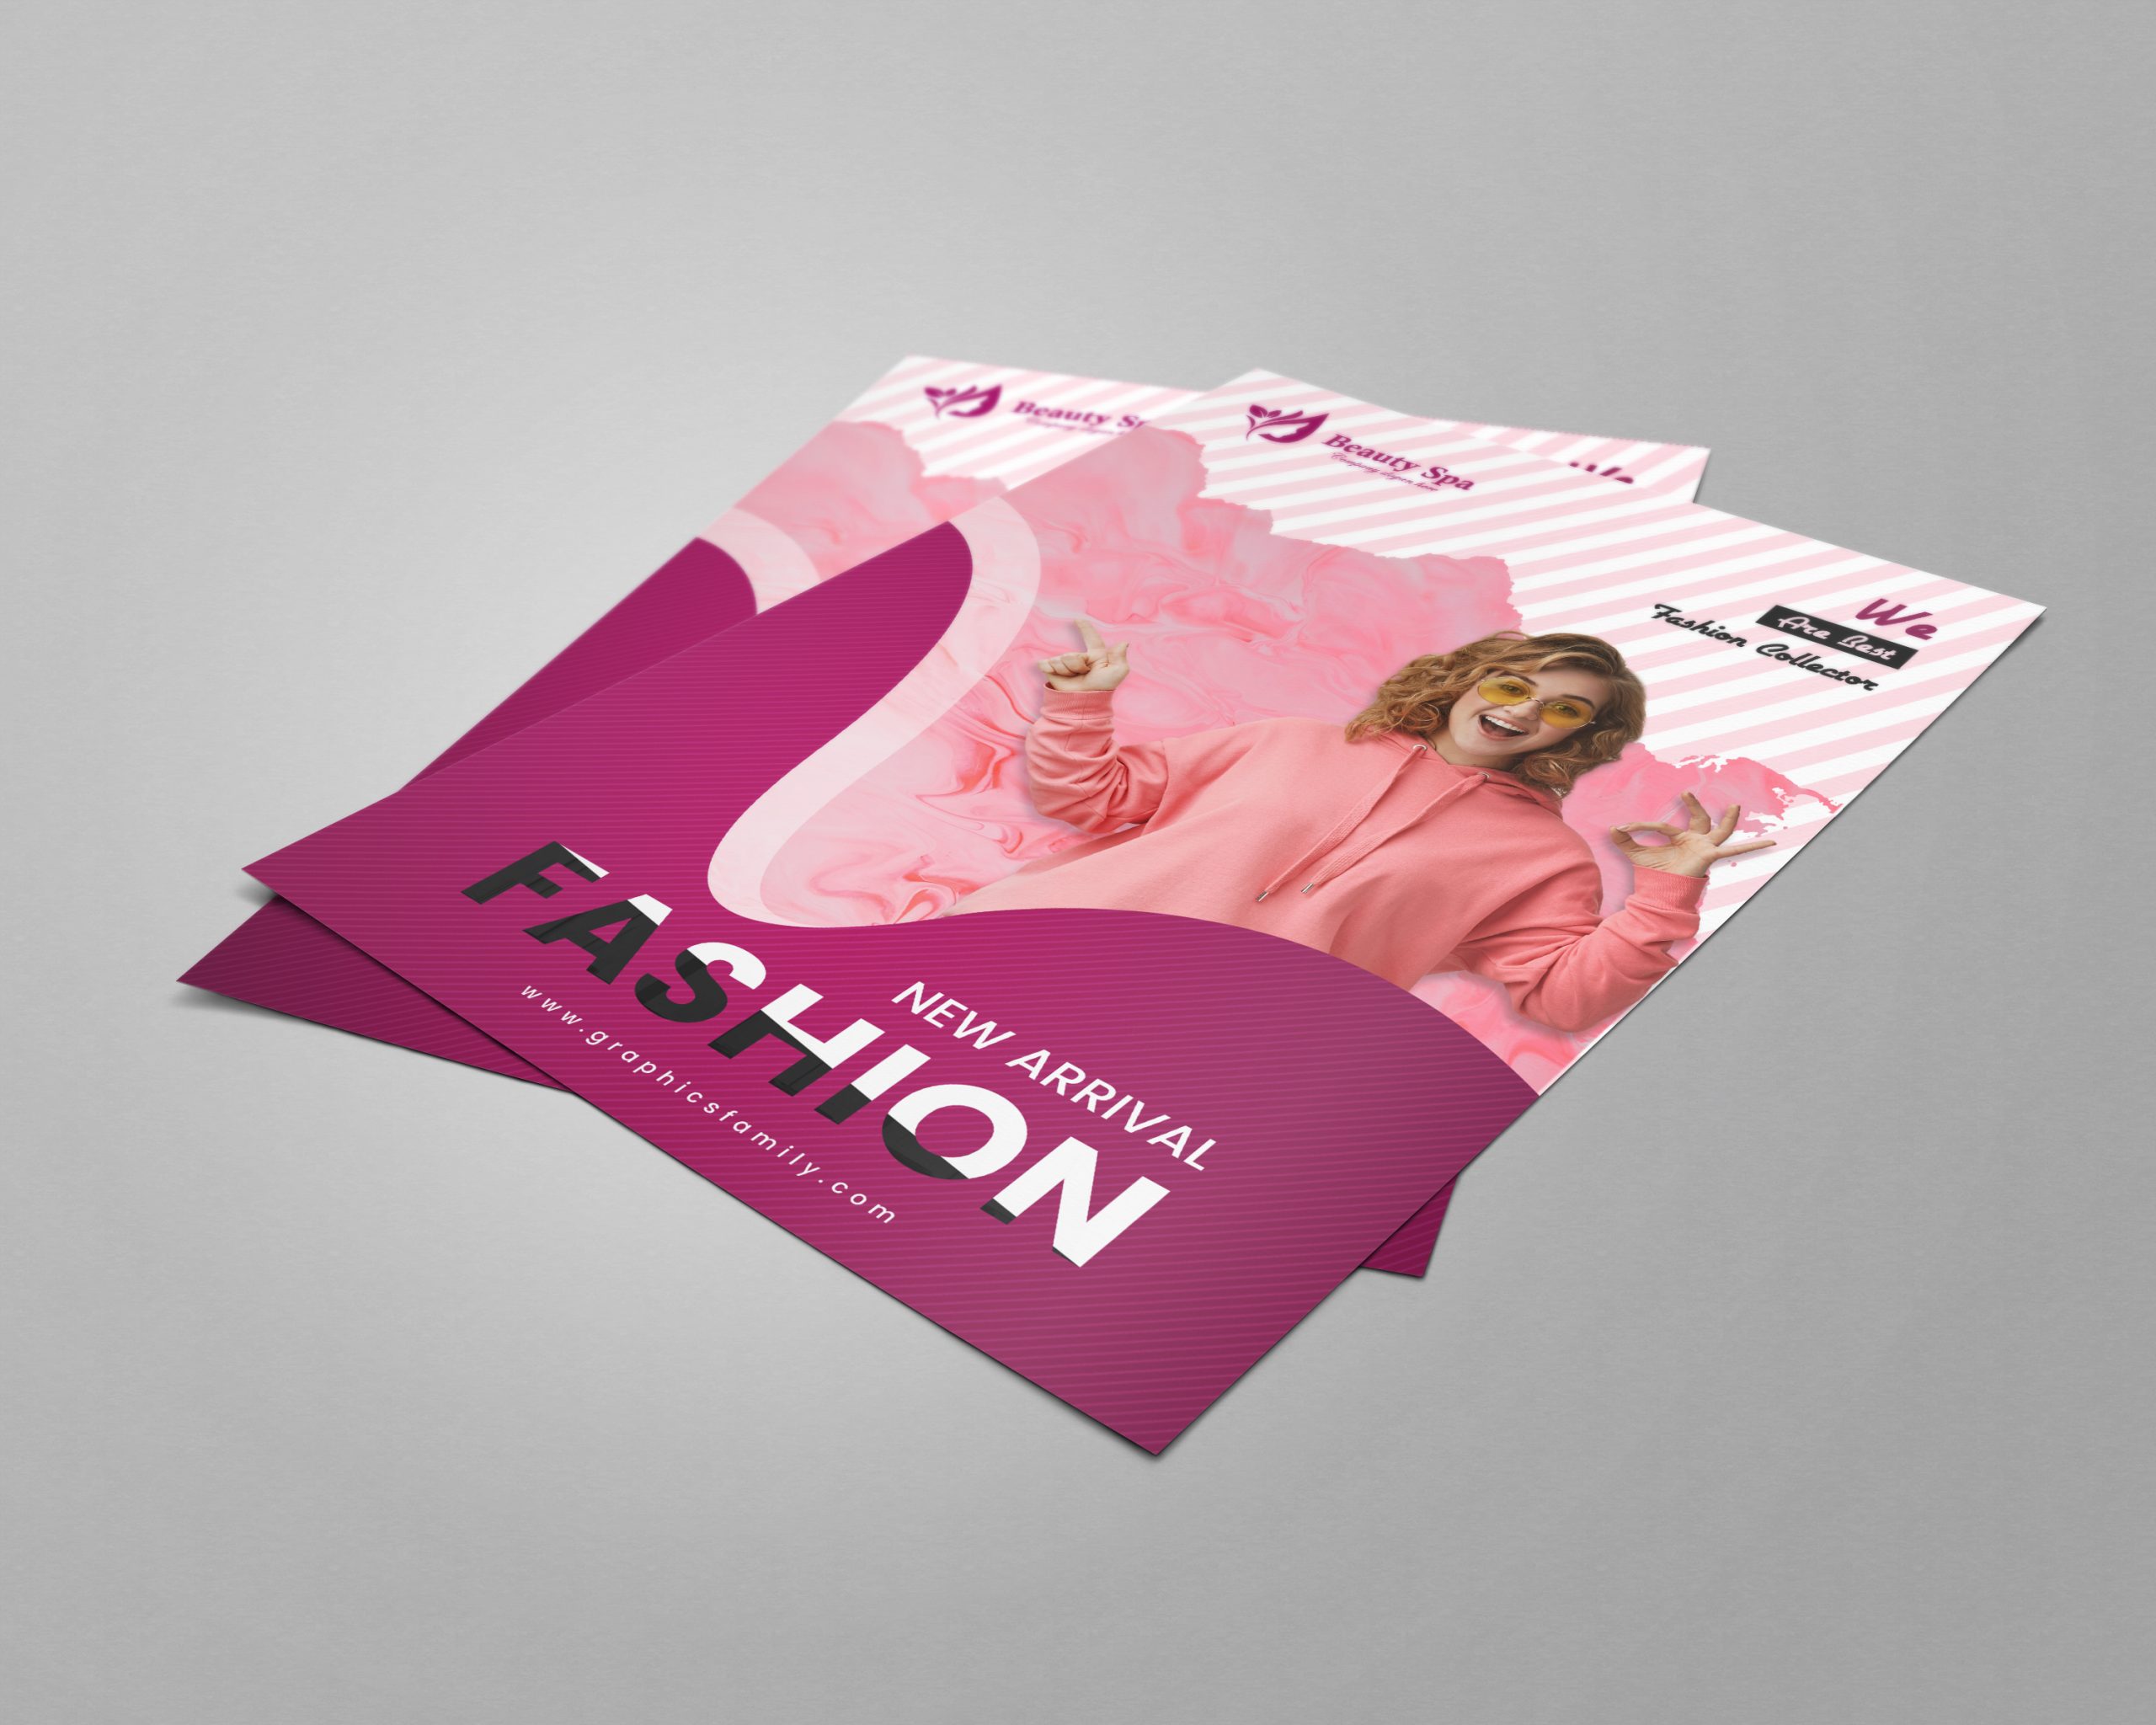 Free Download Fashion Flyer Design Template for Promoting Product or Event